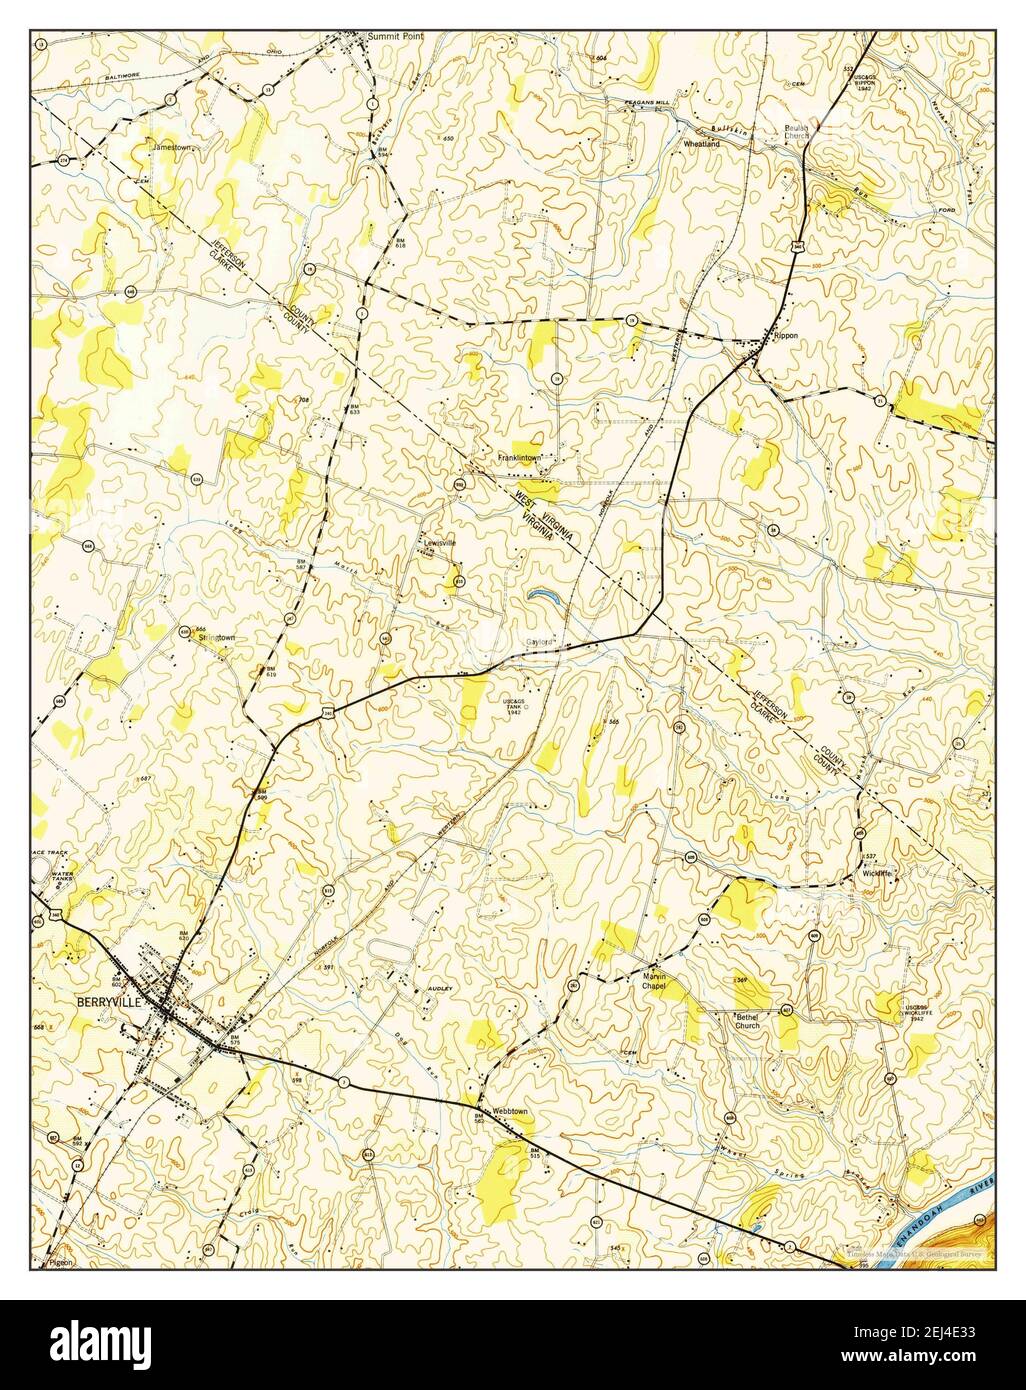 Berryville, Virginia, map 1953, 1:24000, United States of America by Timeless Maps, data U.S. Geological Survey Stock Photo